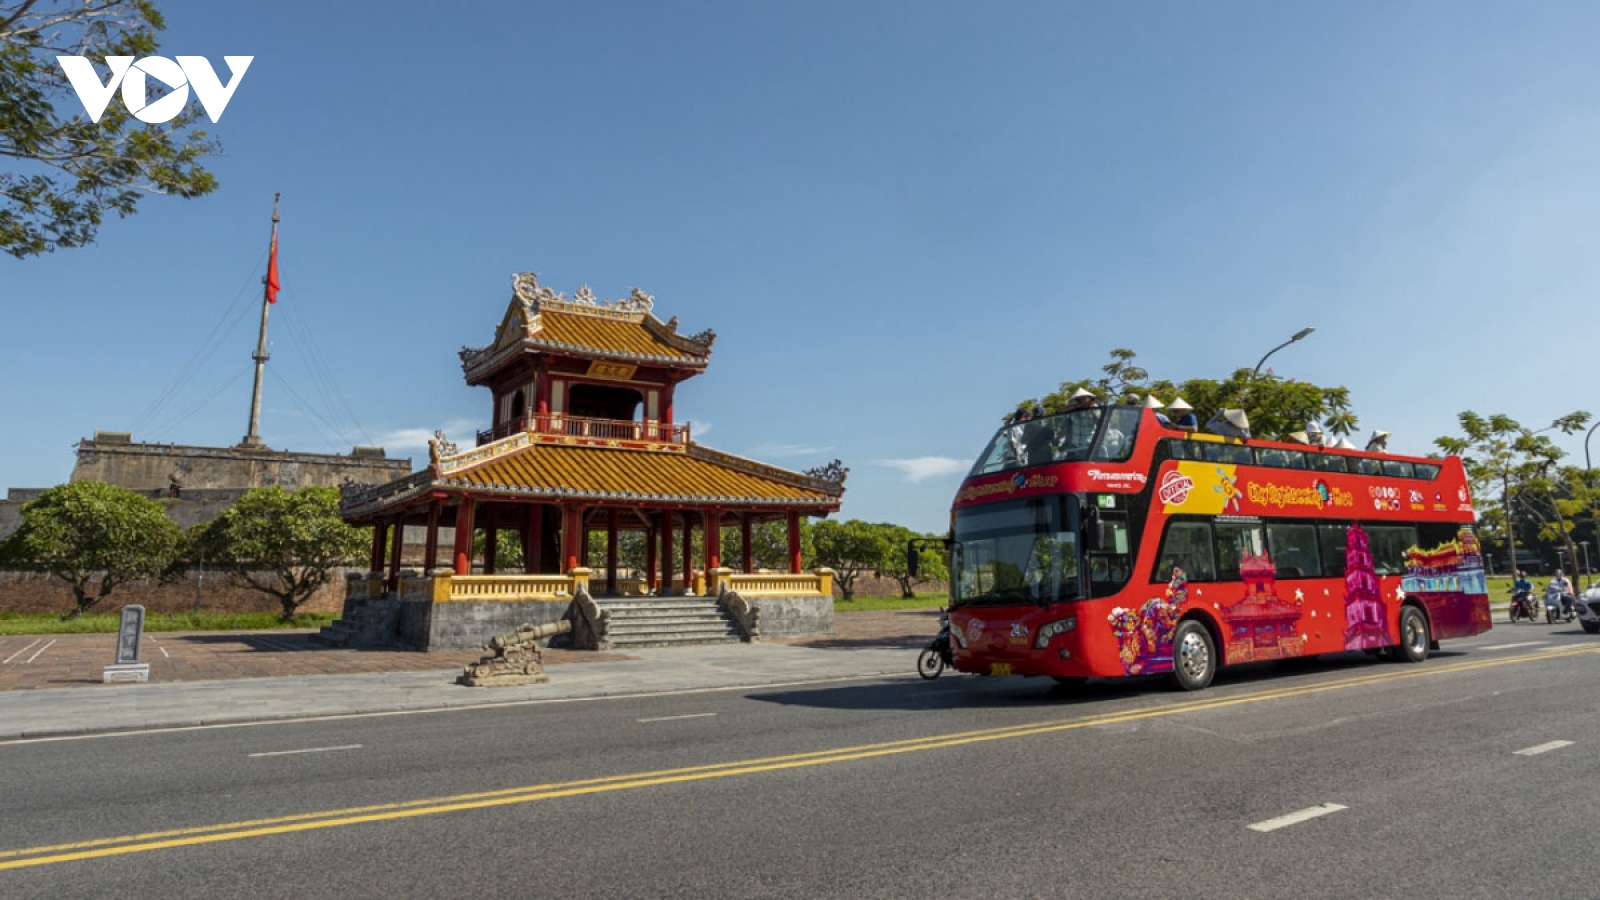 Taking a tour of Hue on double-decker bus